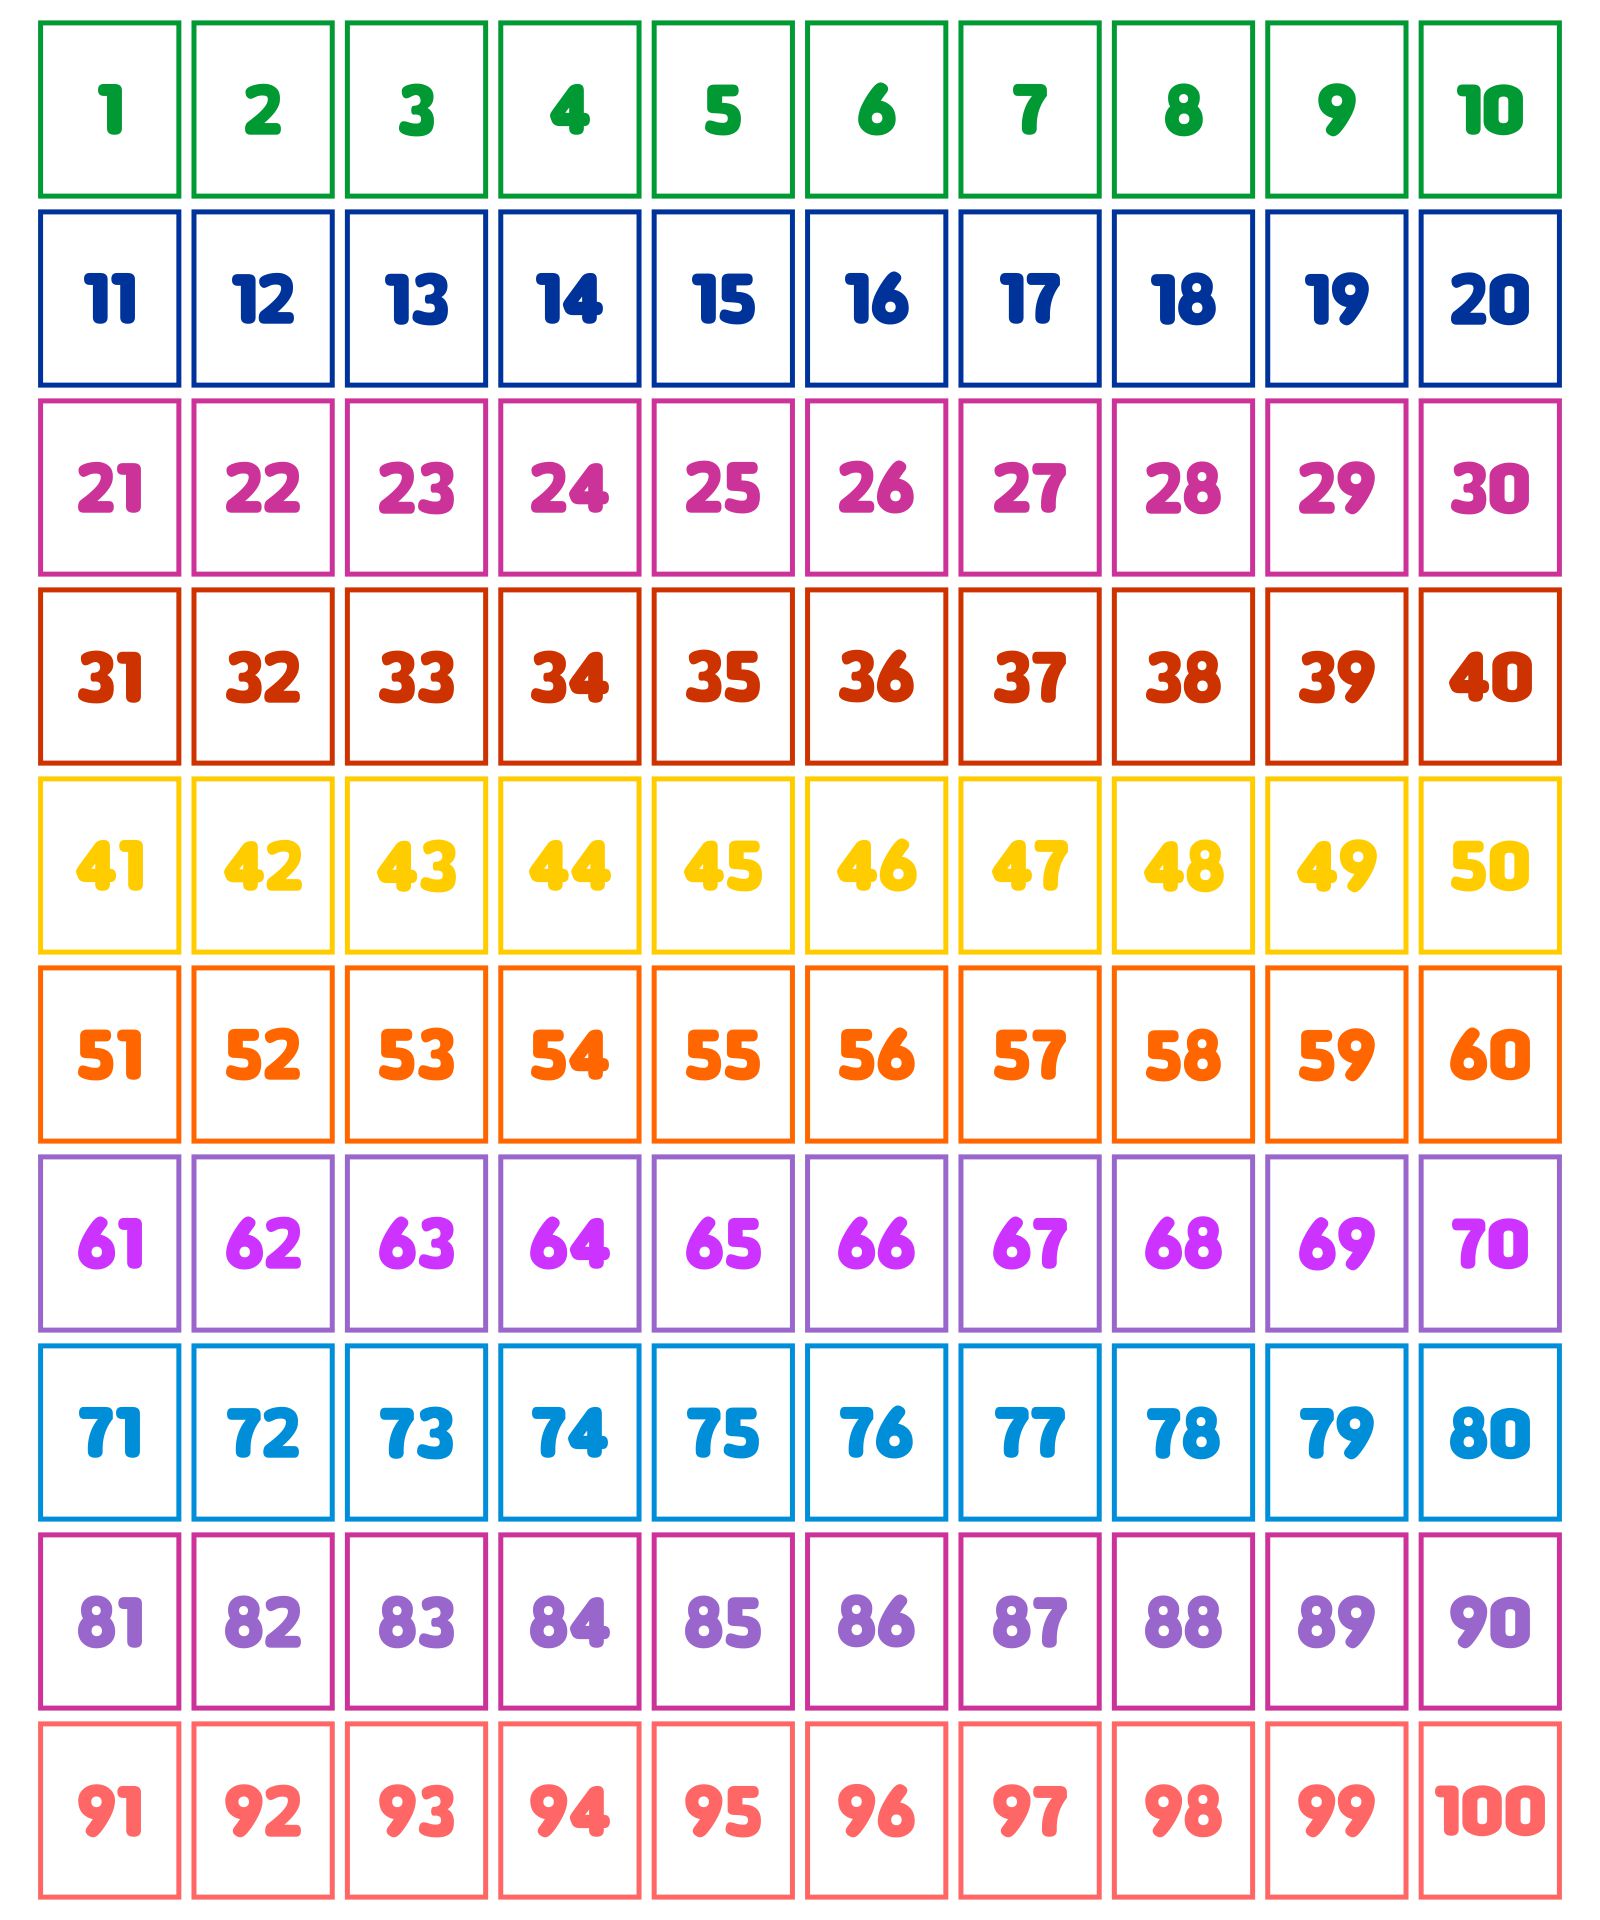 5-best-images-of-numbers-0-100-printable-printable-number-cards-0-100-all-in-one-photos